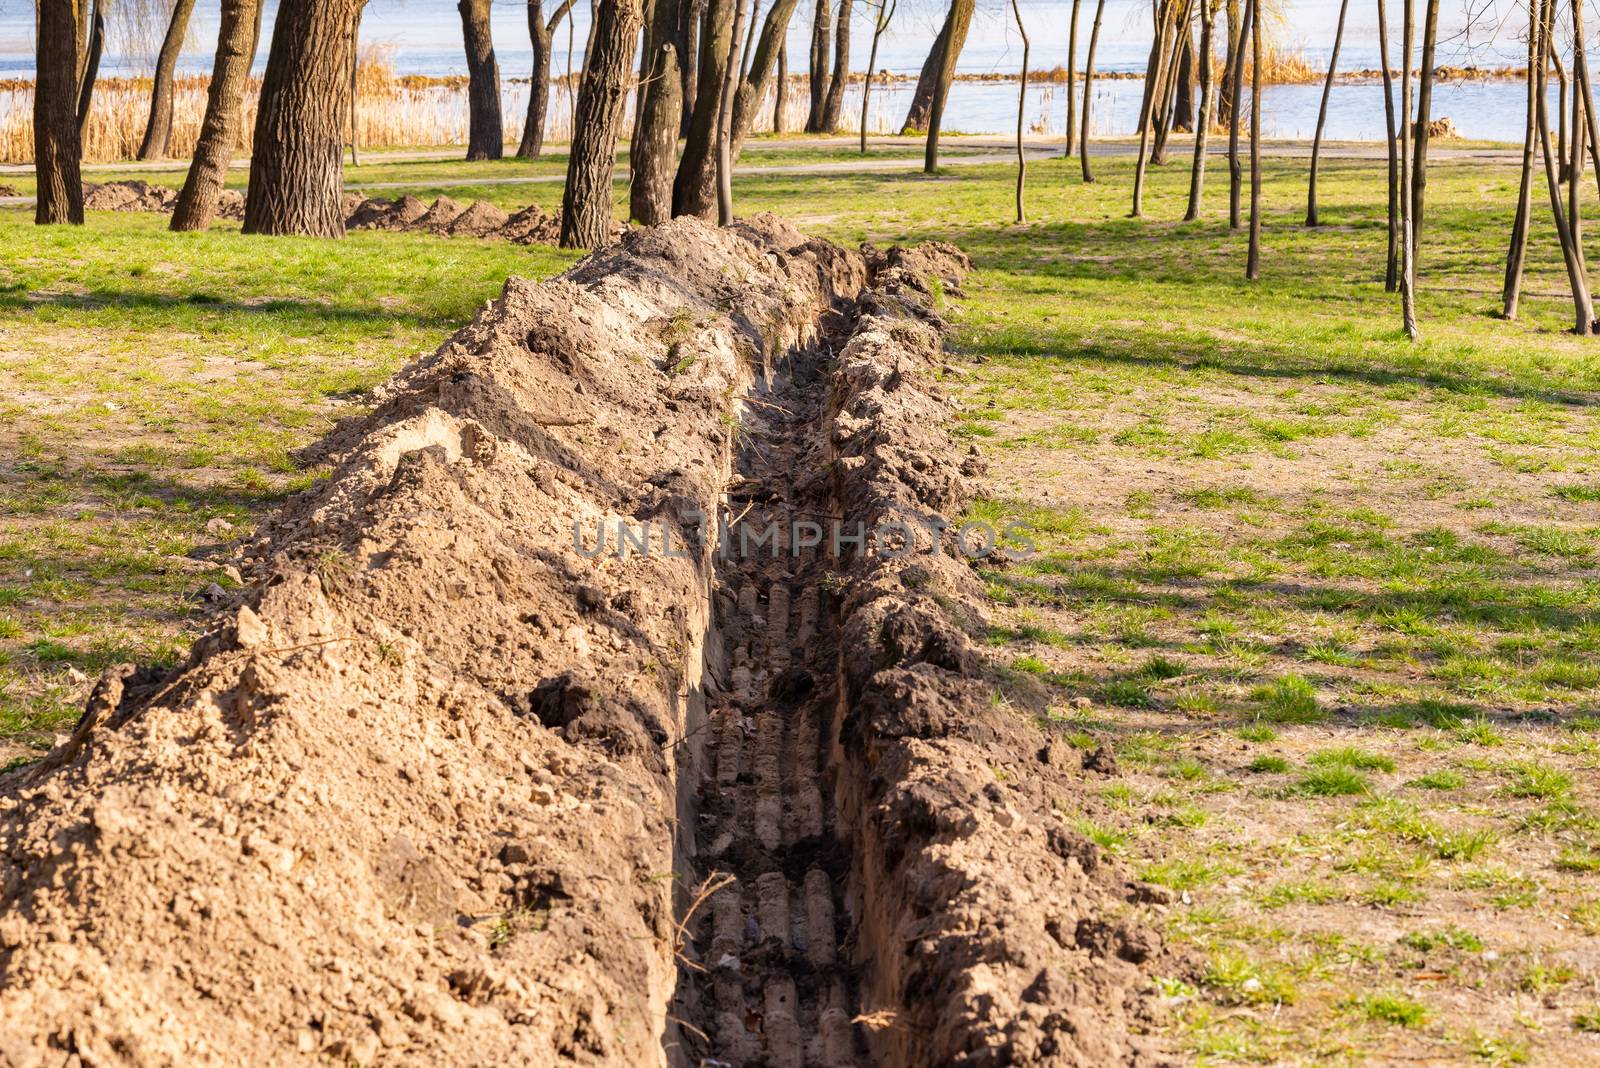 A trench in the ground for laying a pipe, or tubes, in the park, under the trees, close to the river, with spring light